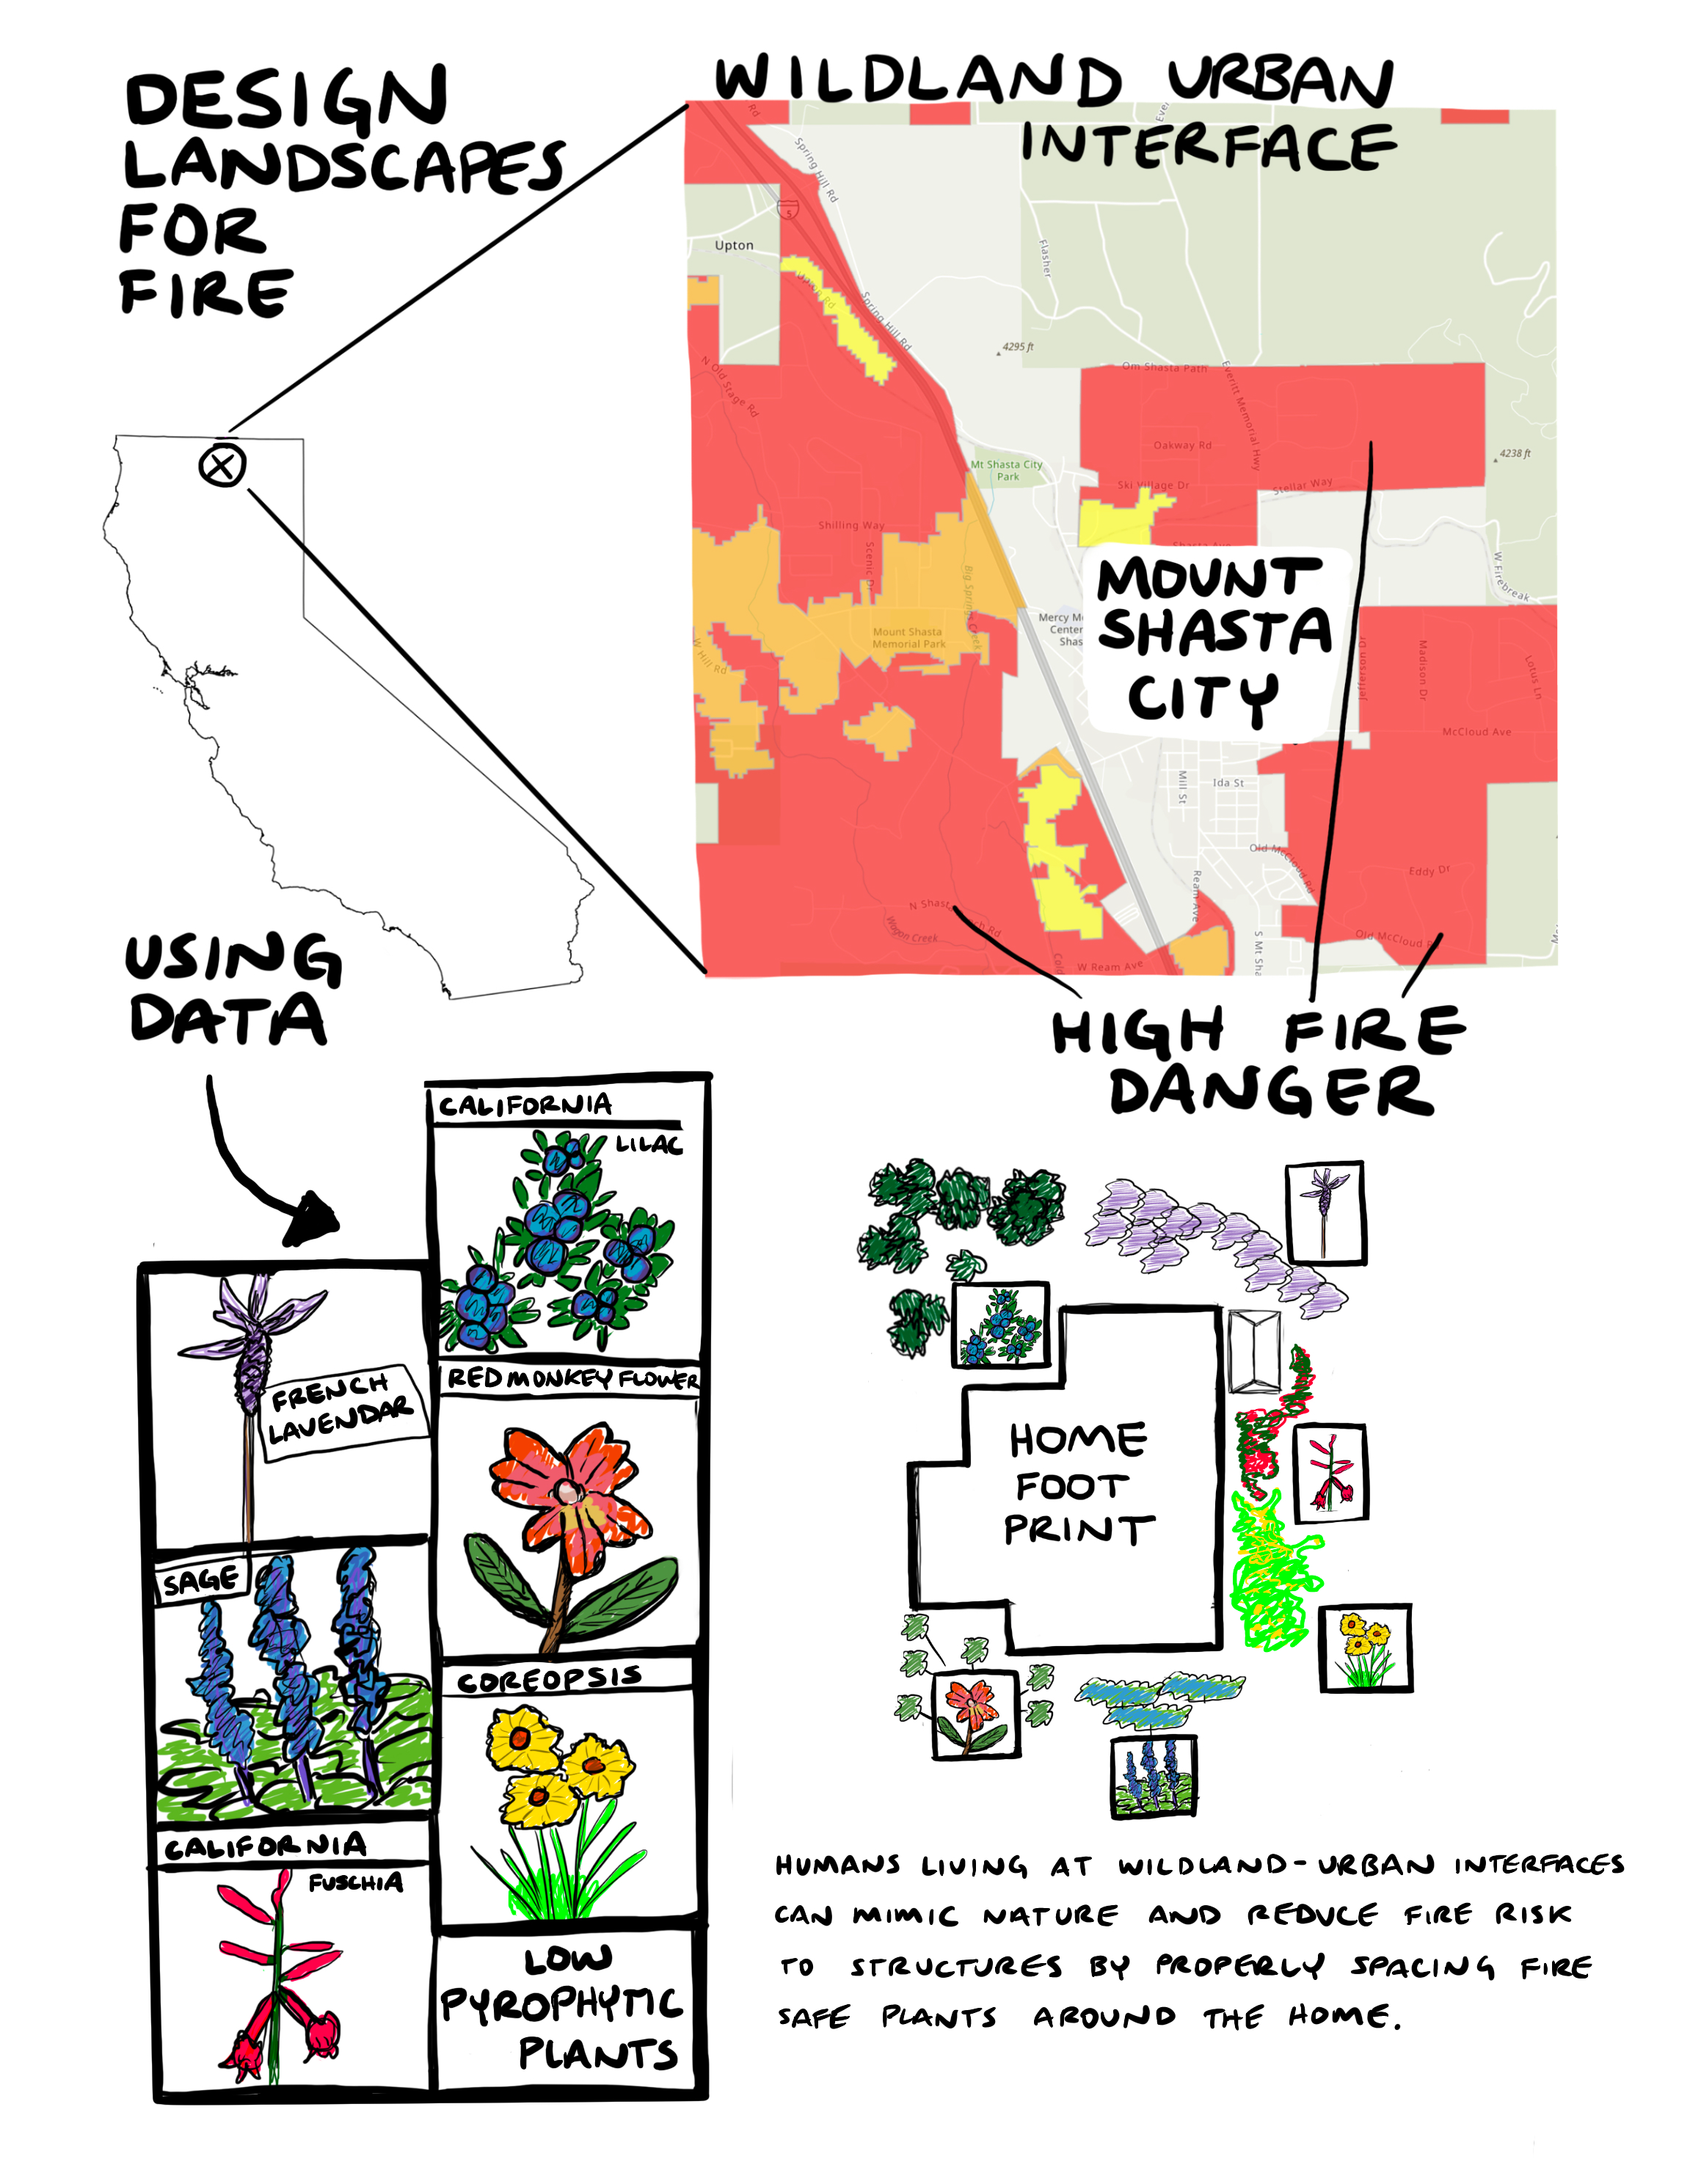 Fire Zine: Ecosystems and Human Scales